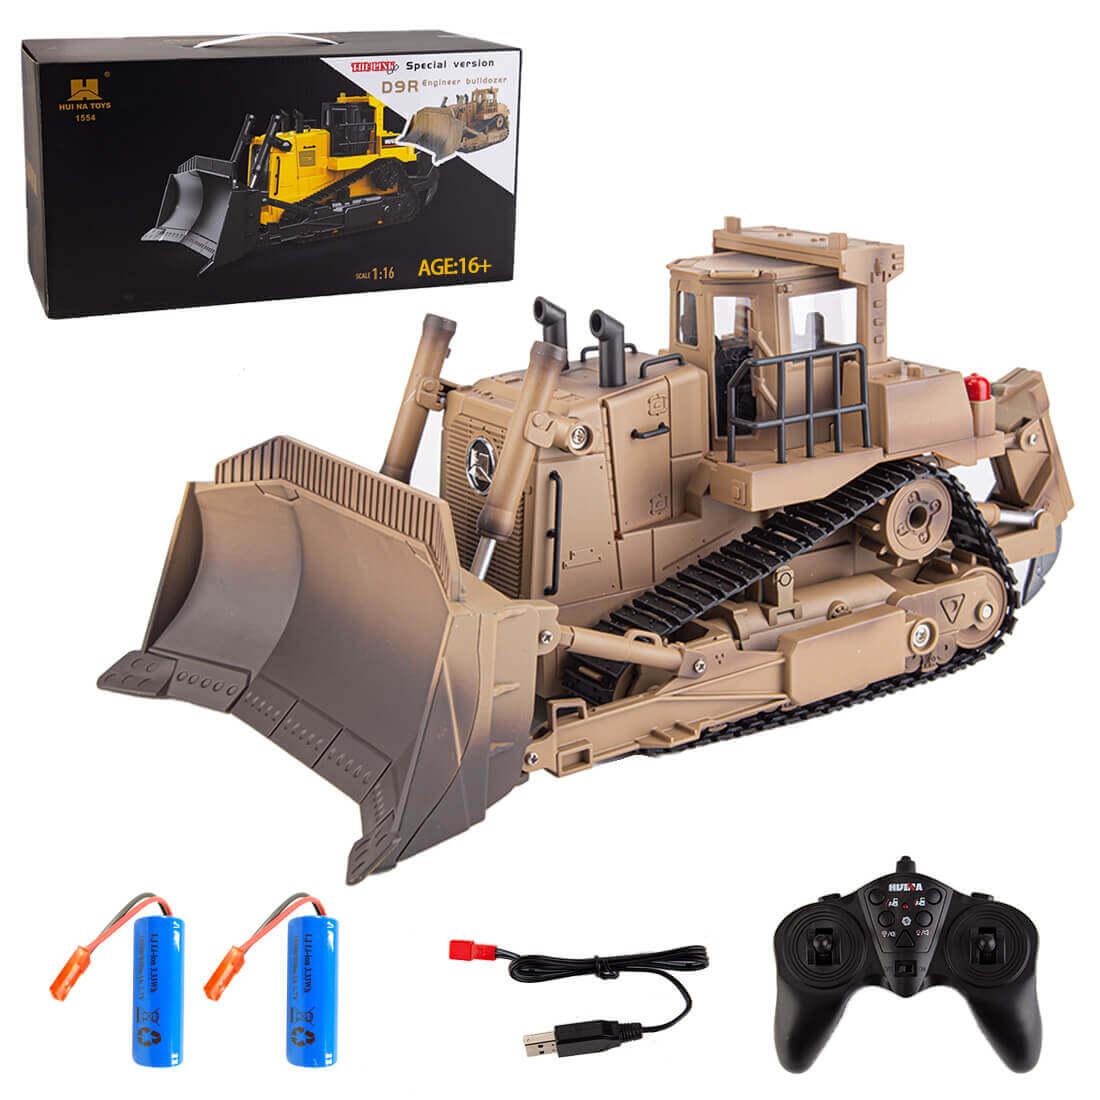 THE LINK×HUINA 1/16 2.4GHz 9CH RC US Army Armored Engineering Bulldozer Model D9R 1